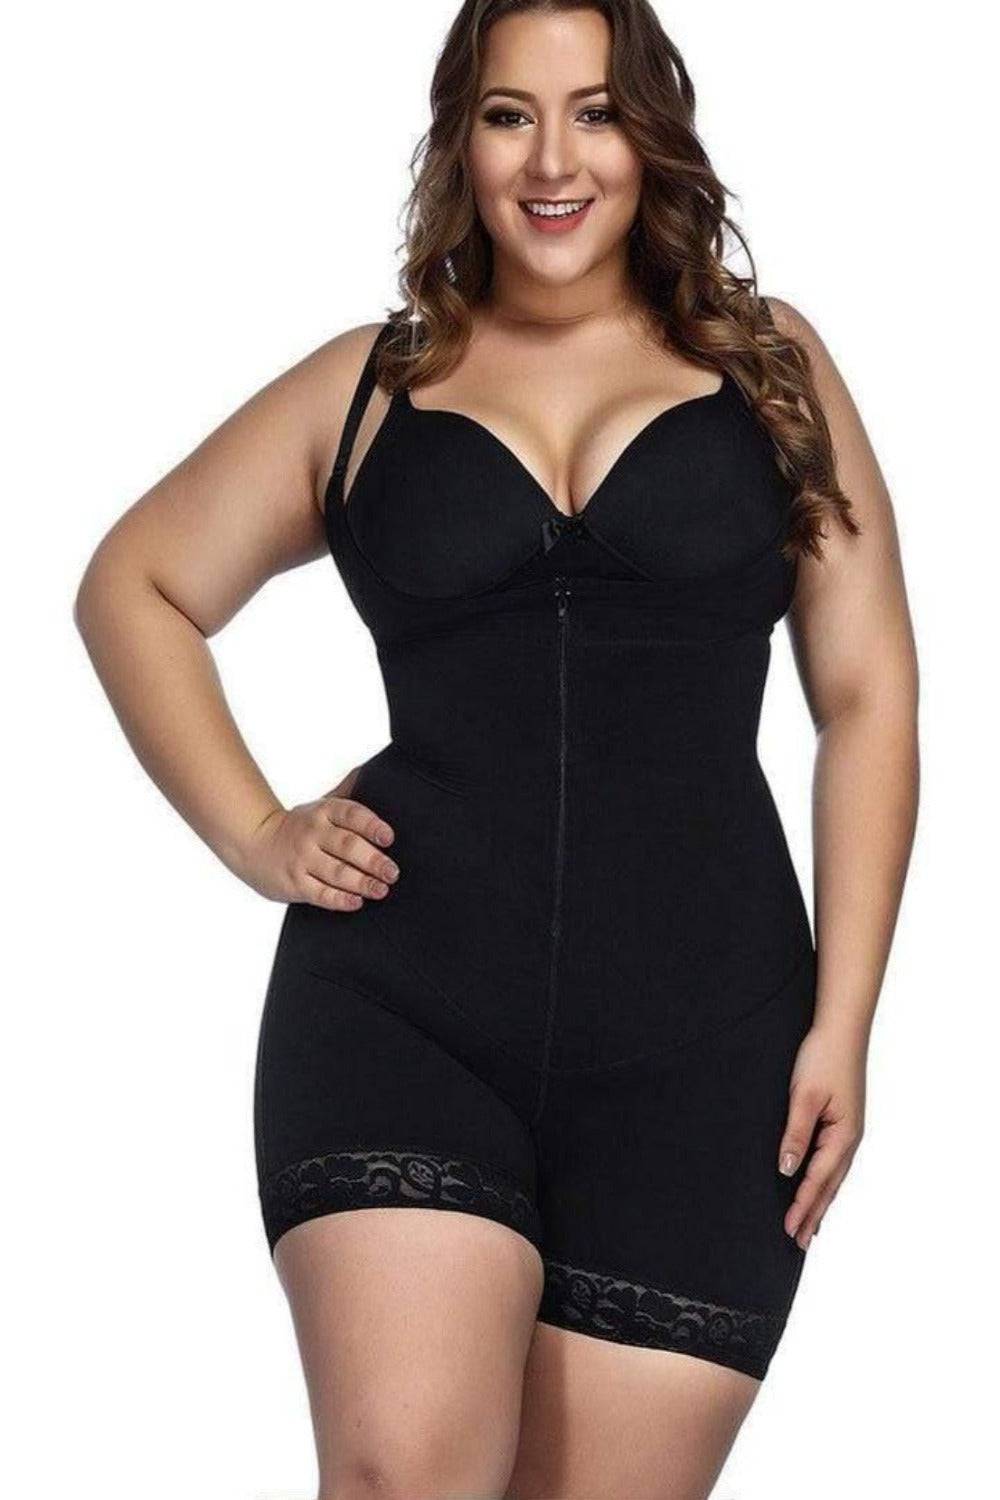 🆕 Kymaro New Body Shaper Compression Top Shapewear for INSTANT SLIMMING